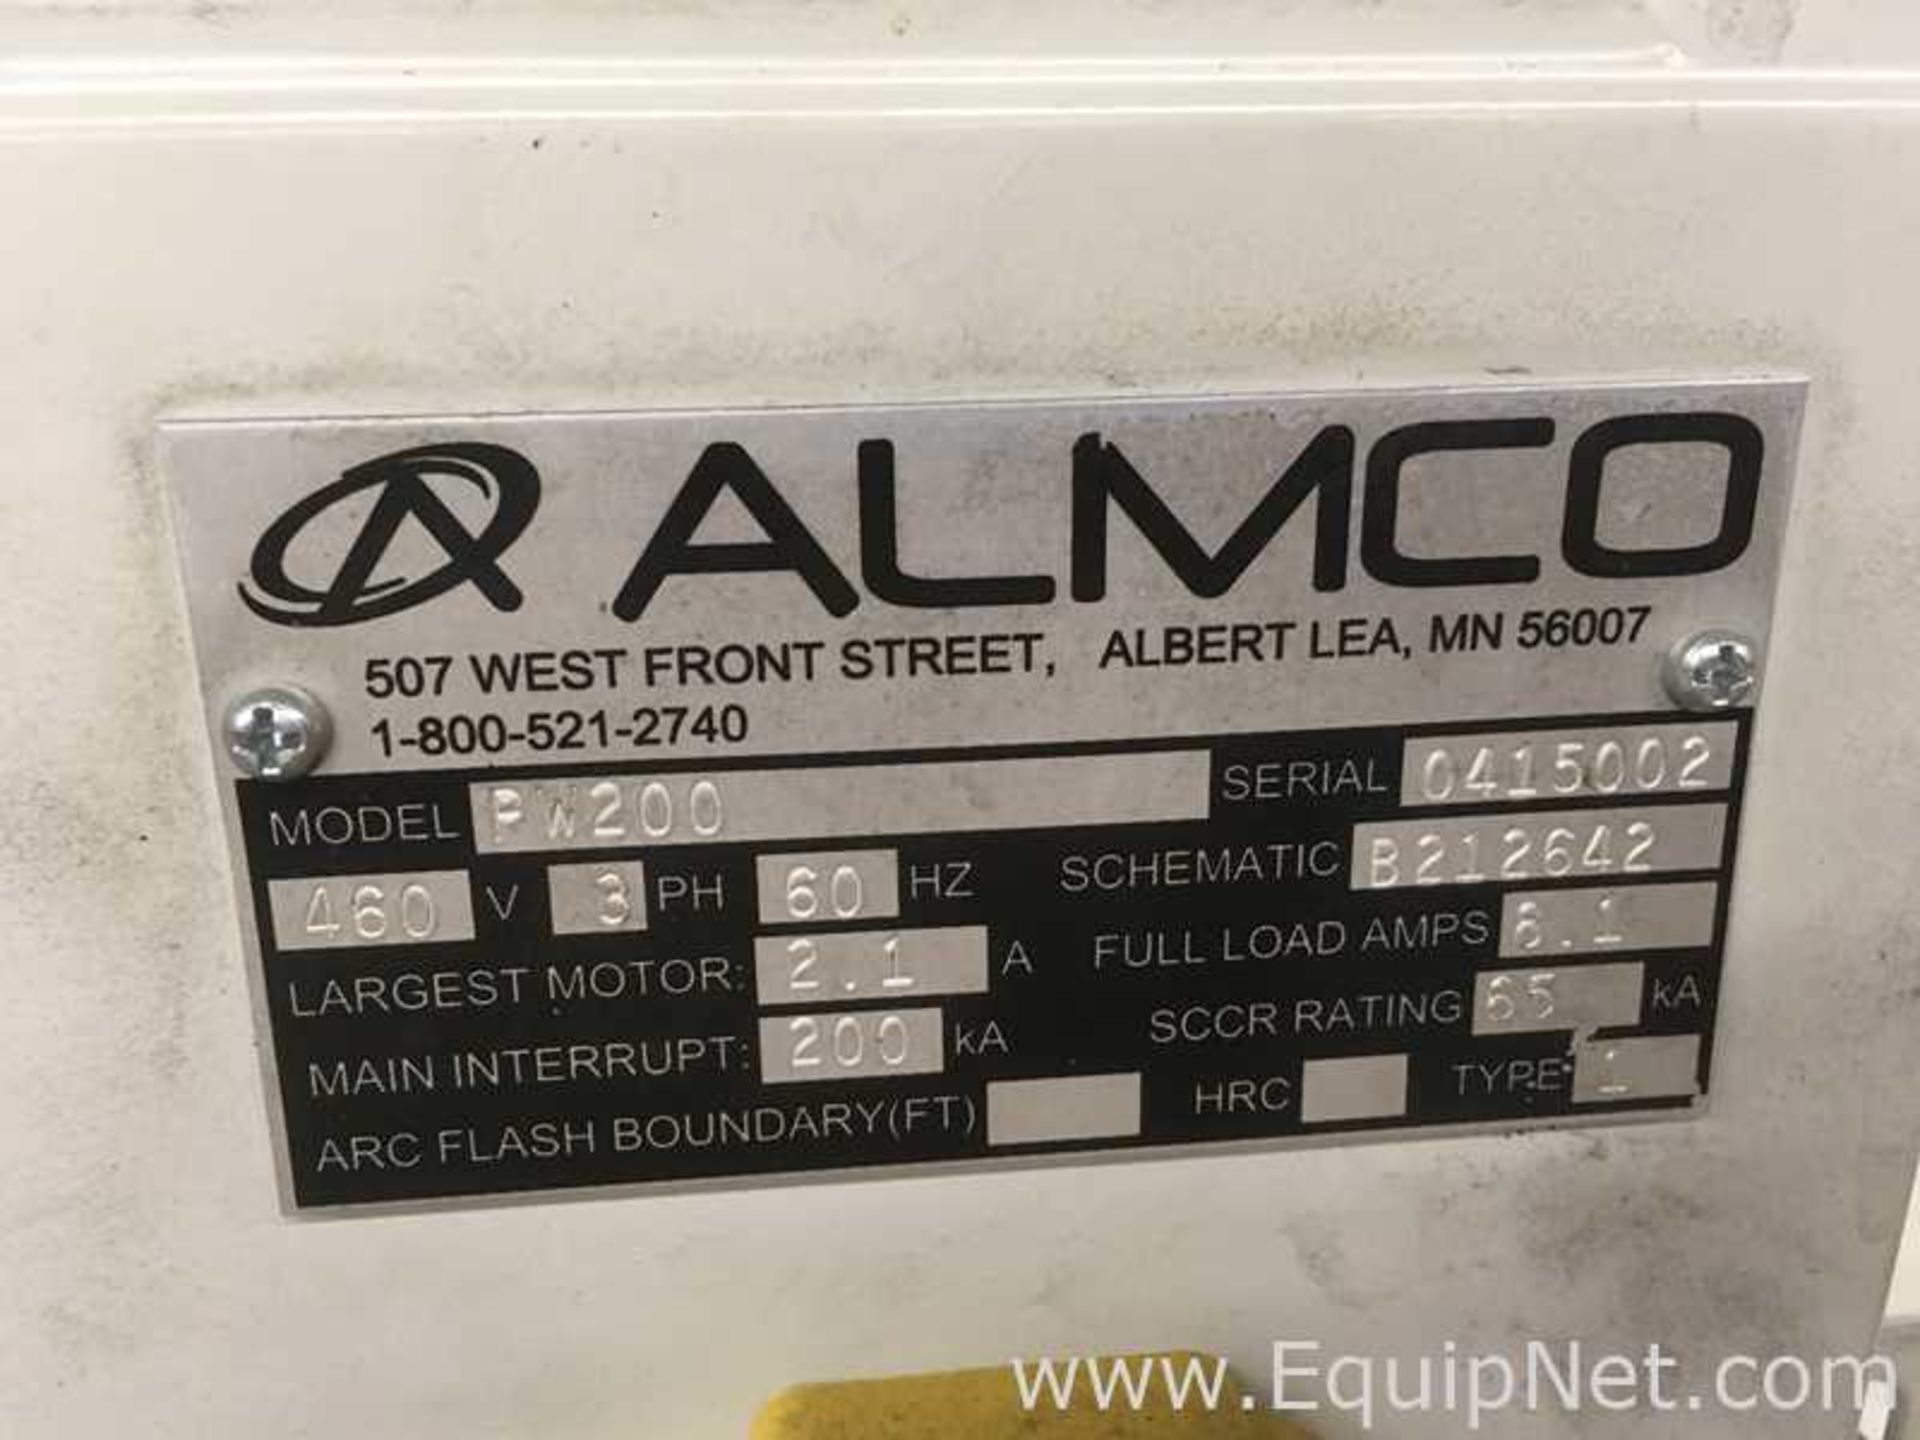 Almco PW 200 Parts Dunk Washer With Agitator Motorized Conveyor and Fire CO2 Suppression System - Image 5 of 6